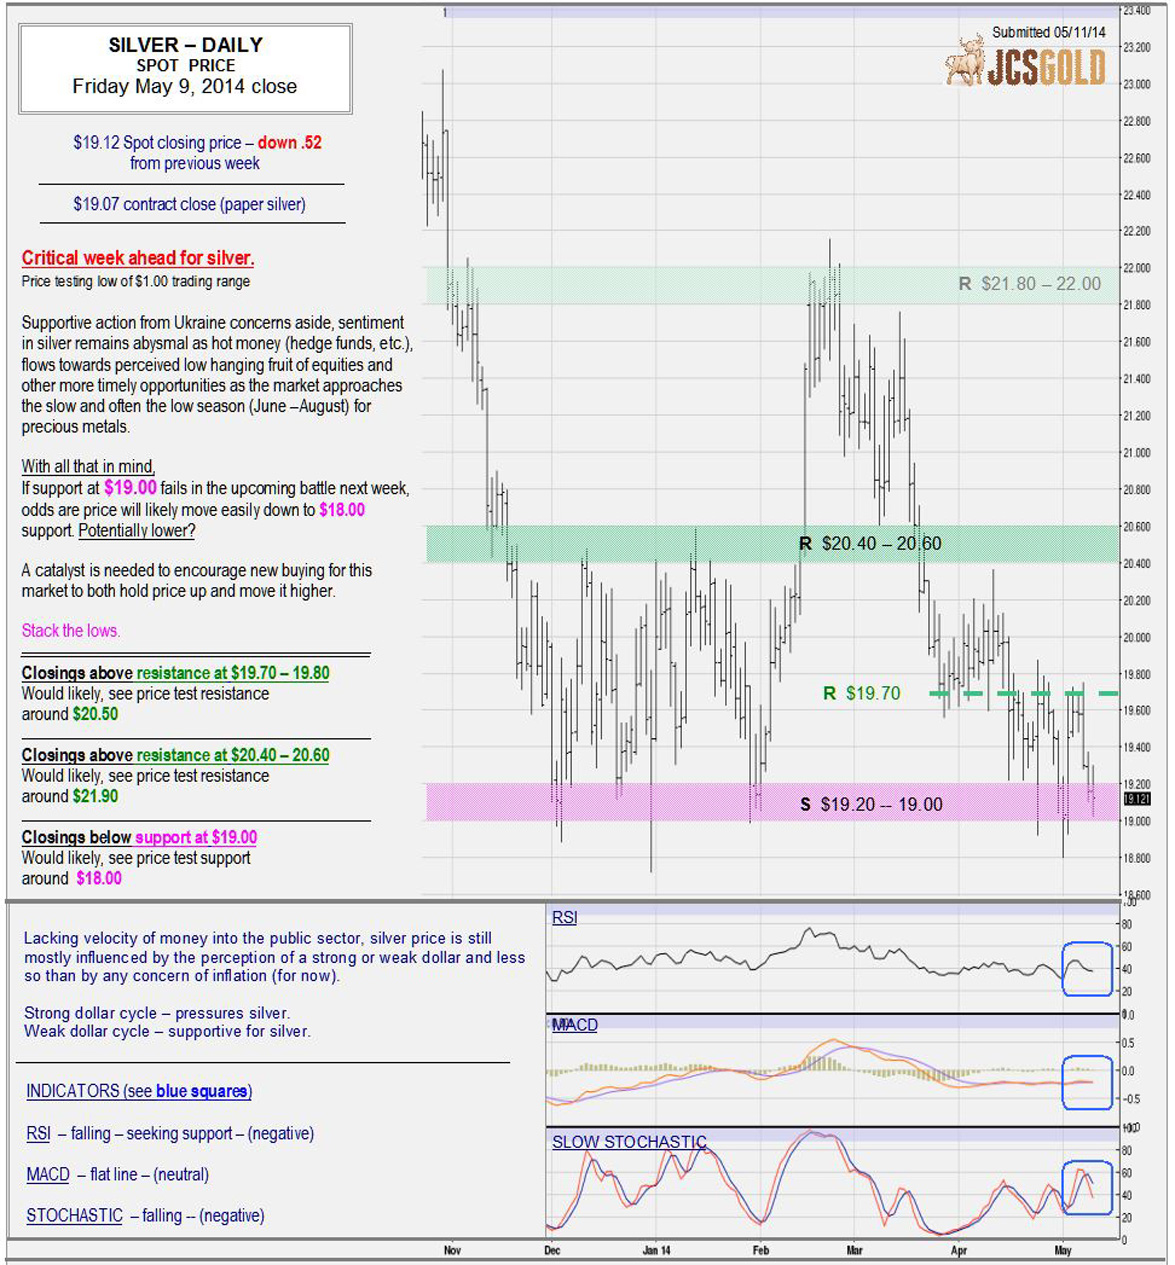 May 9, 2014 chart & commentary